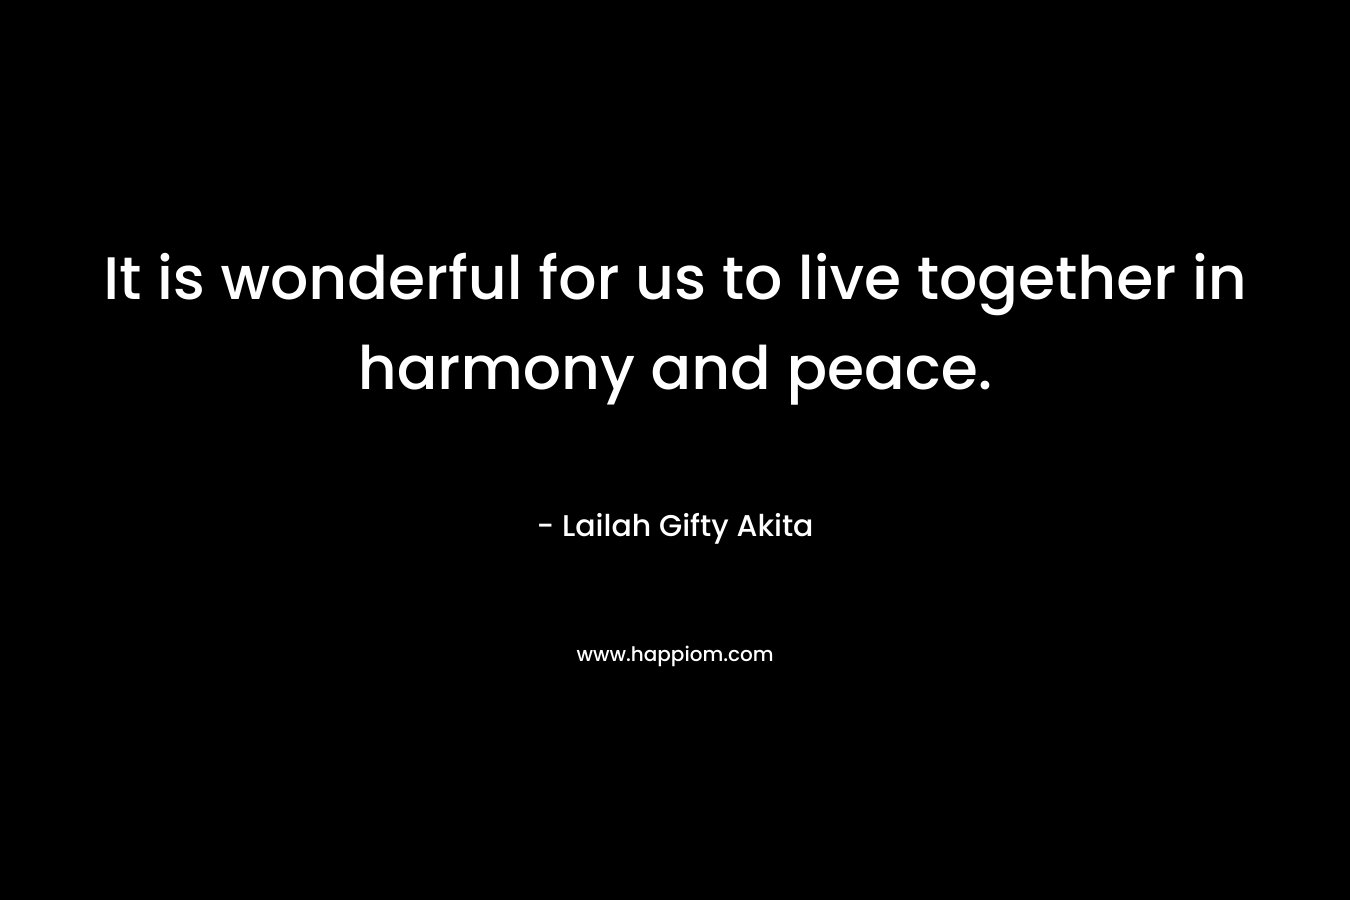 It is wonderful for us to live together in harmony and peace.